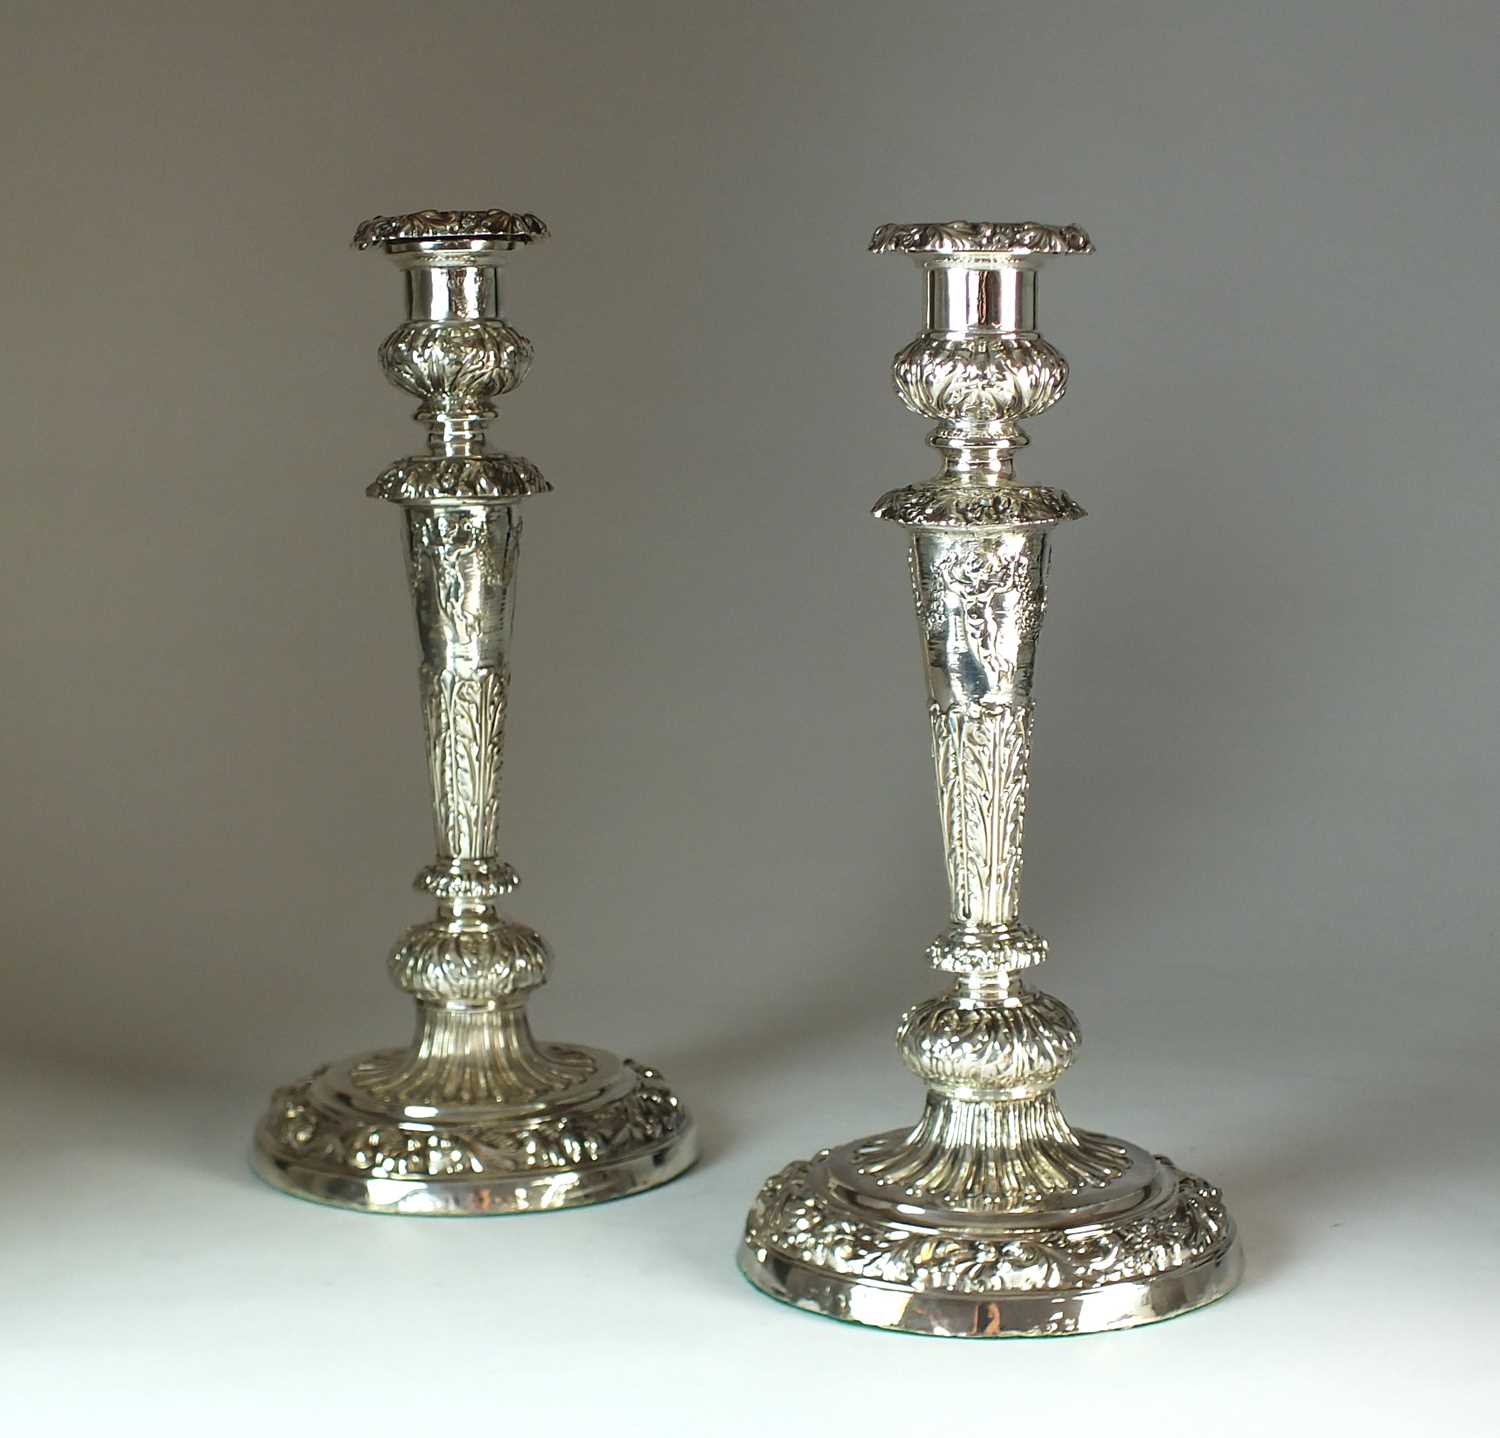 Lot 7 - A pair of George III silver mounted candlesticks